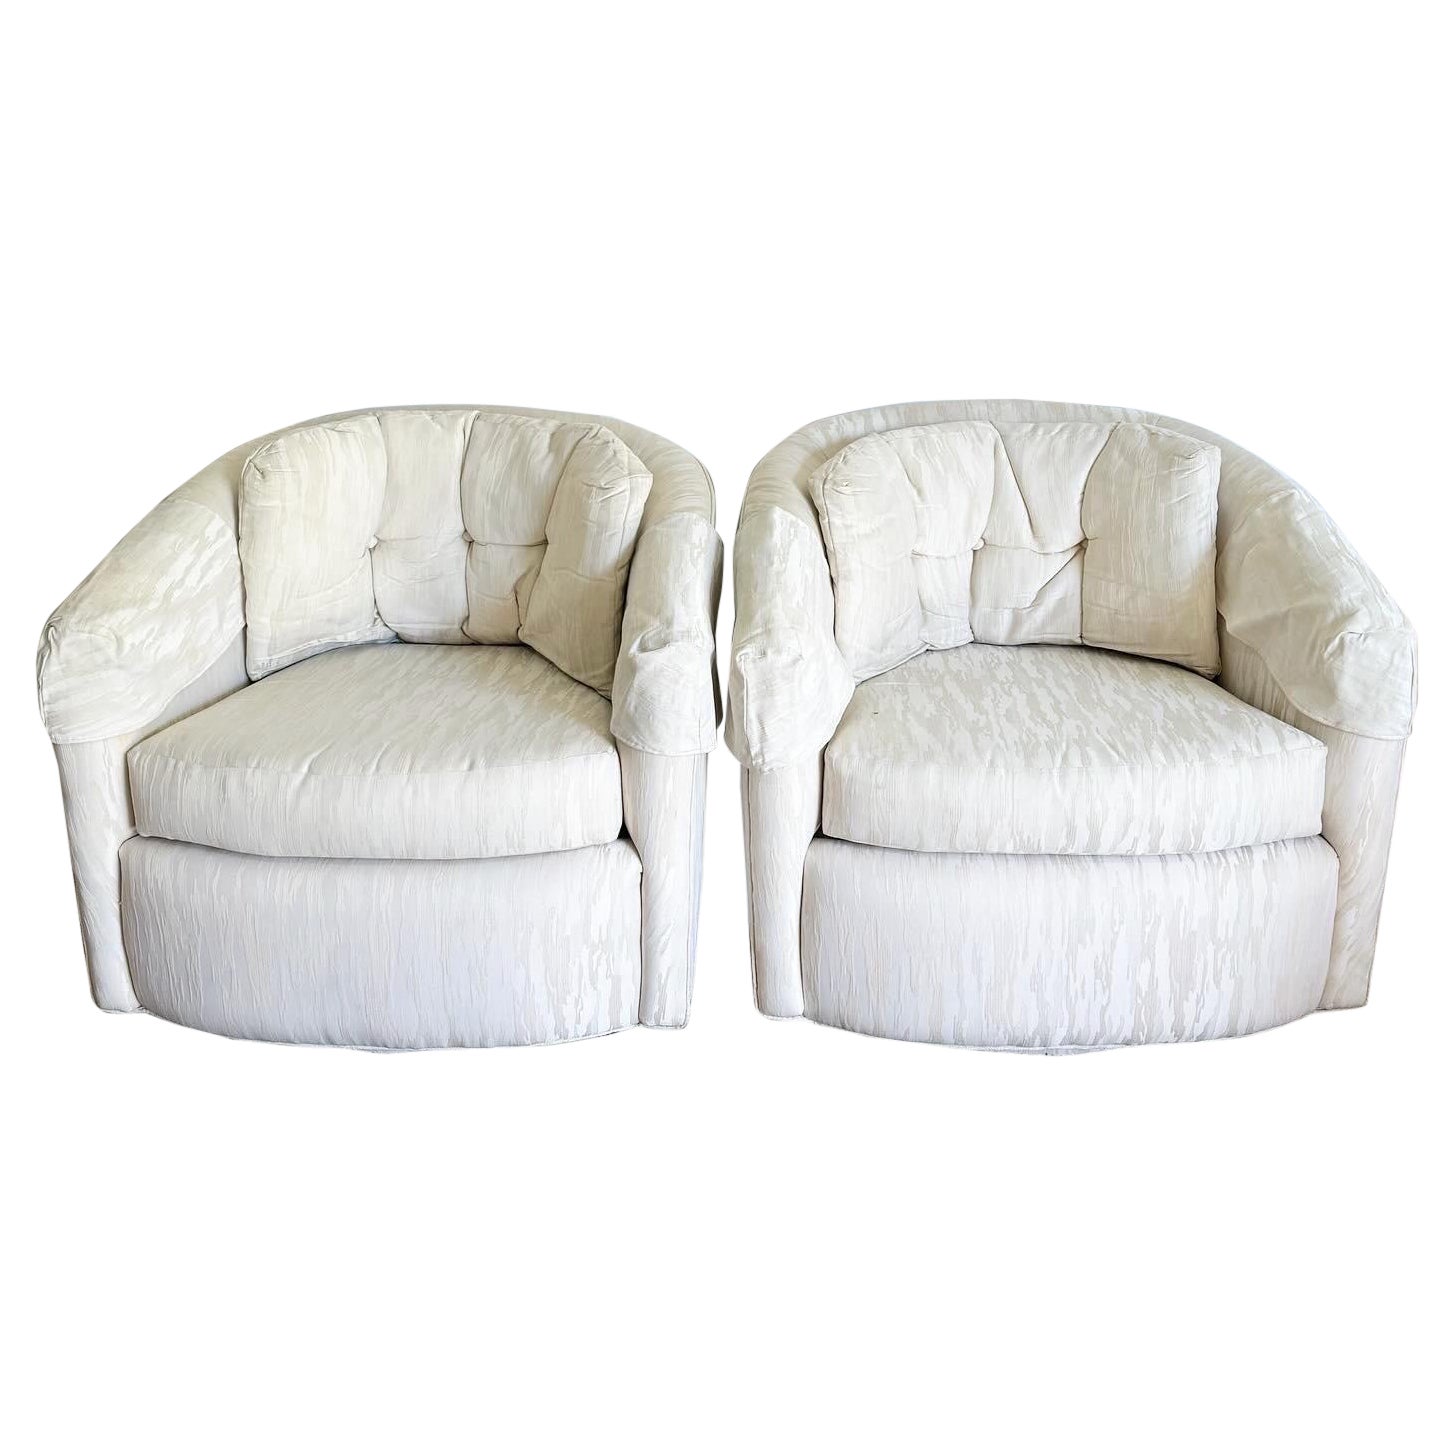 Postmodern Tufted Barrel Swivel Chairs - a Pair For Sale